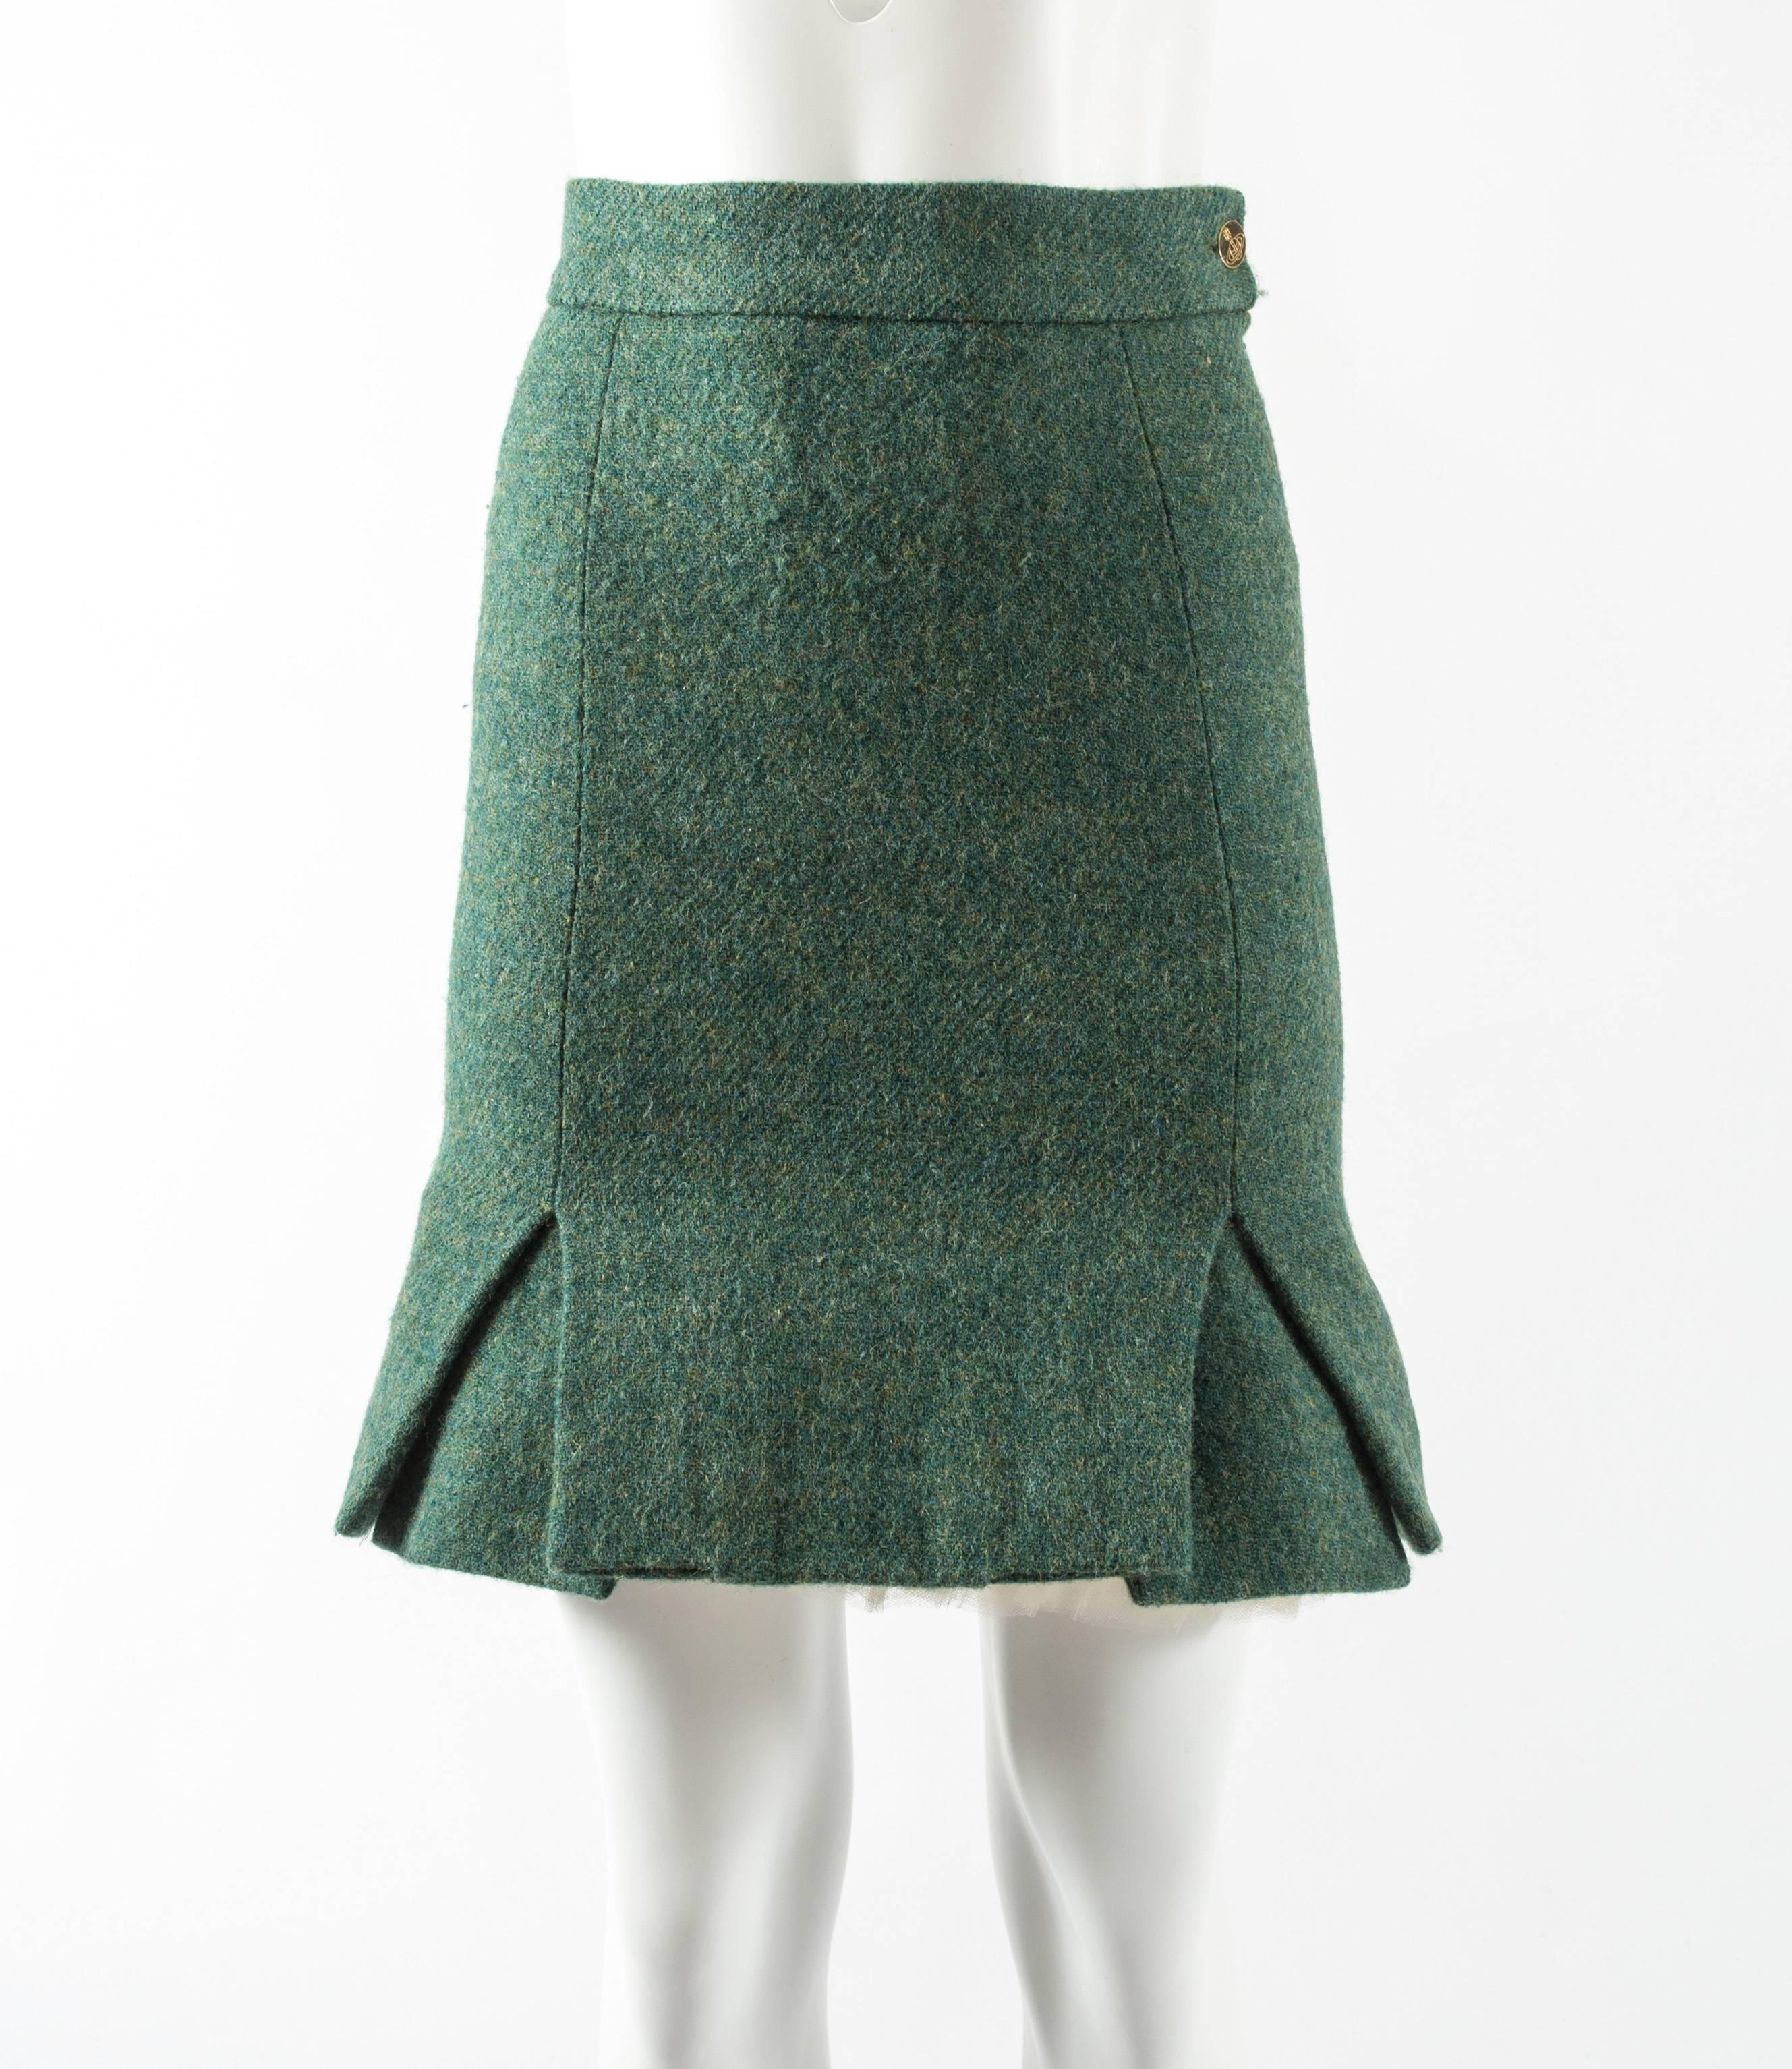 Presenting the Vivienne Westwood green Harris tweed 'Time Machine' mini skirt, a remarkable creation from the Autumn-Winter 1988 collection that exemplifies the designer's daring and innovative style.

Crafted from the finest Harris tweed in an